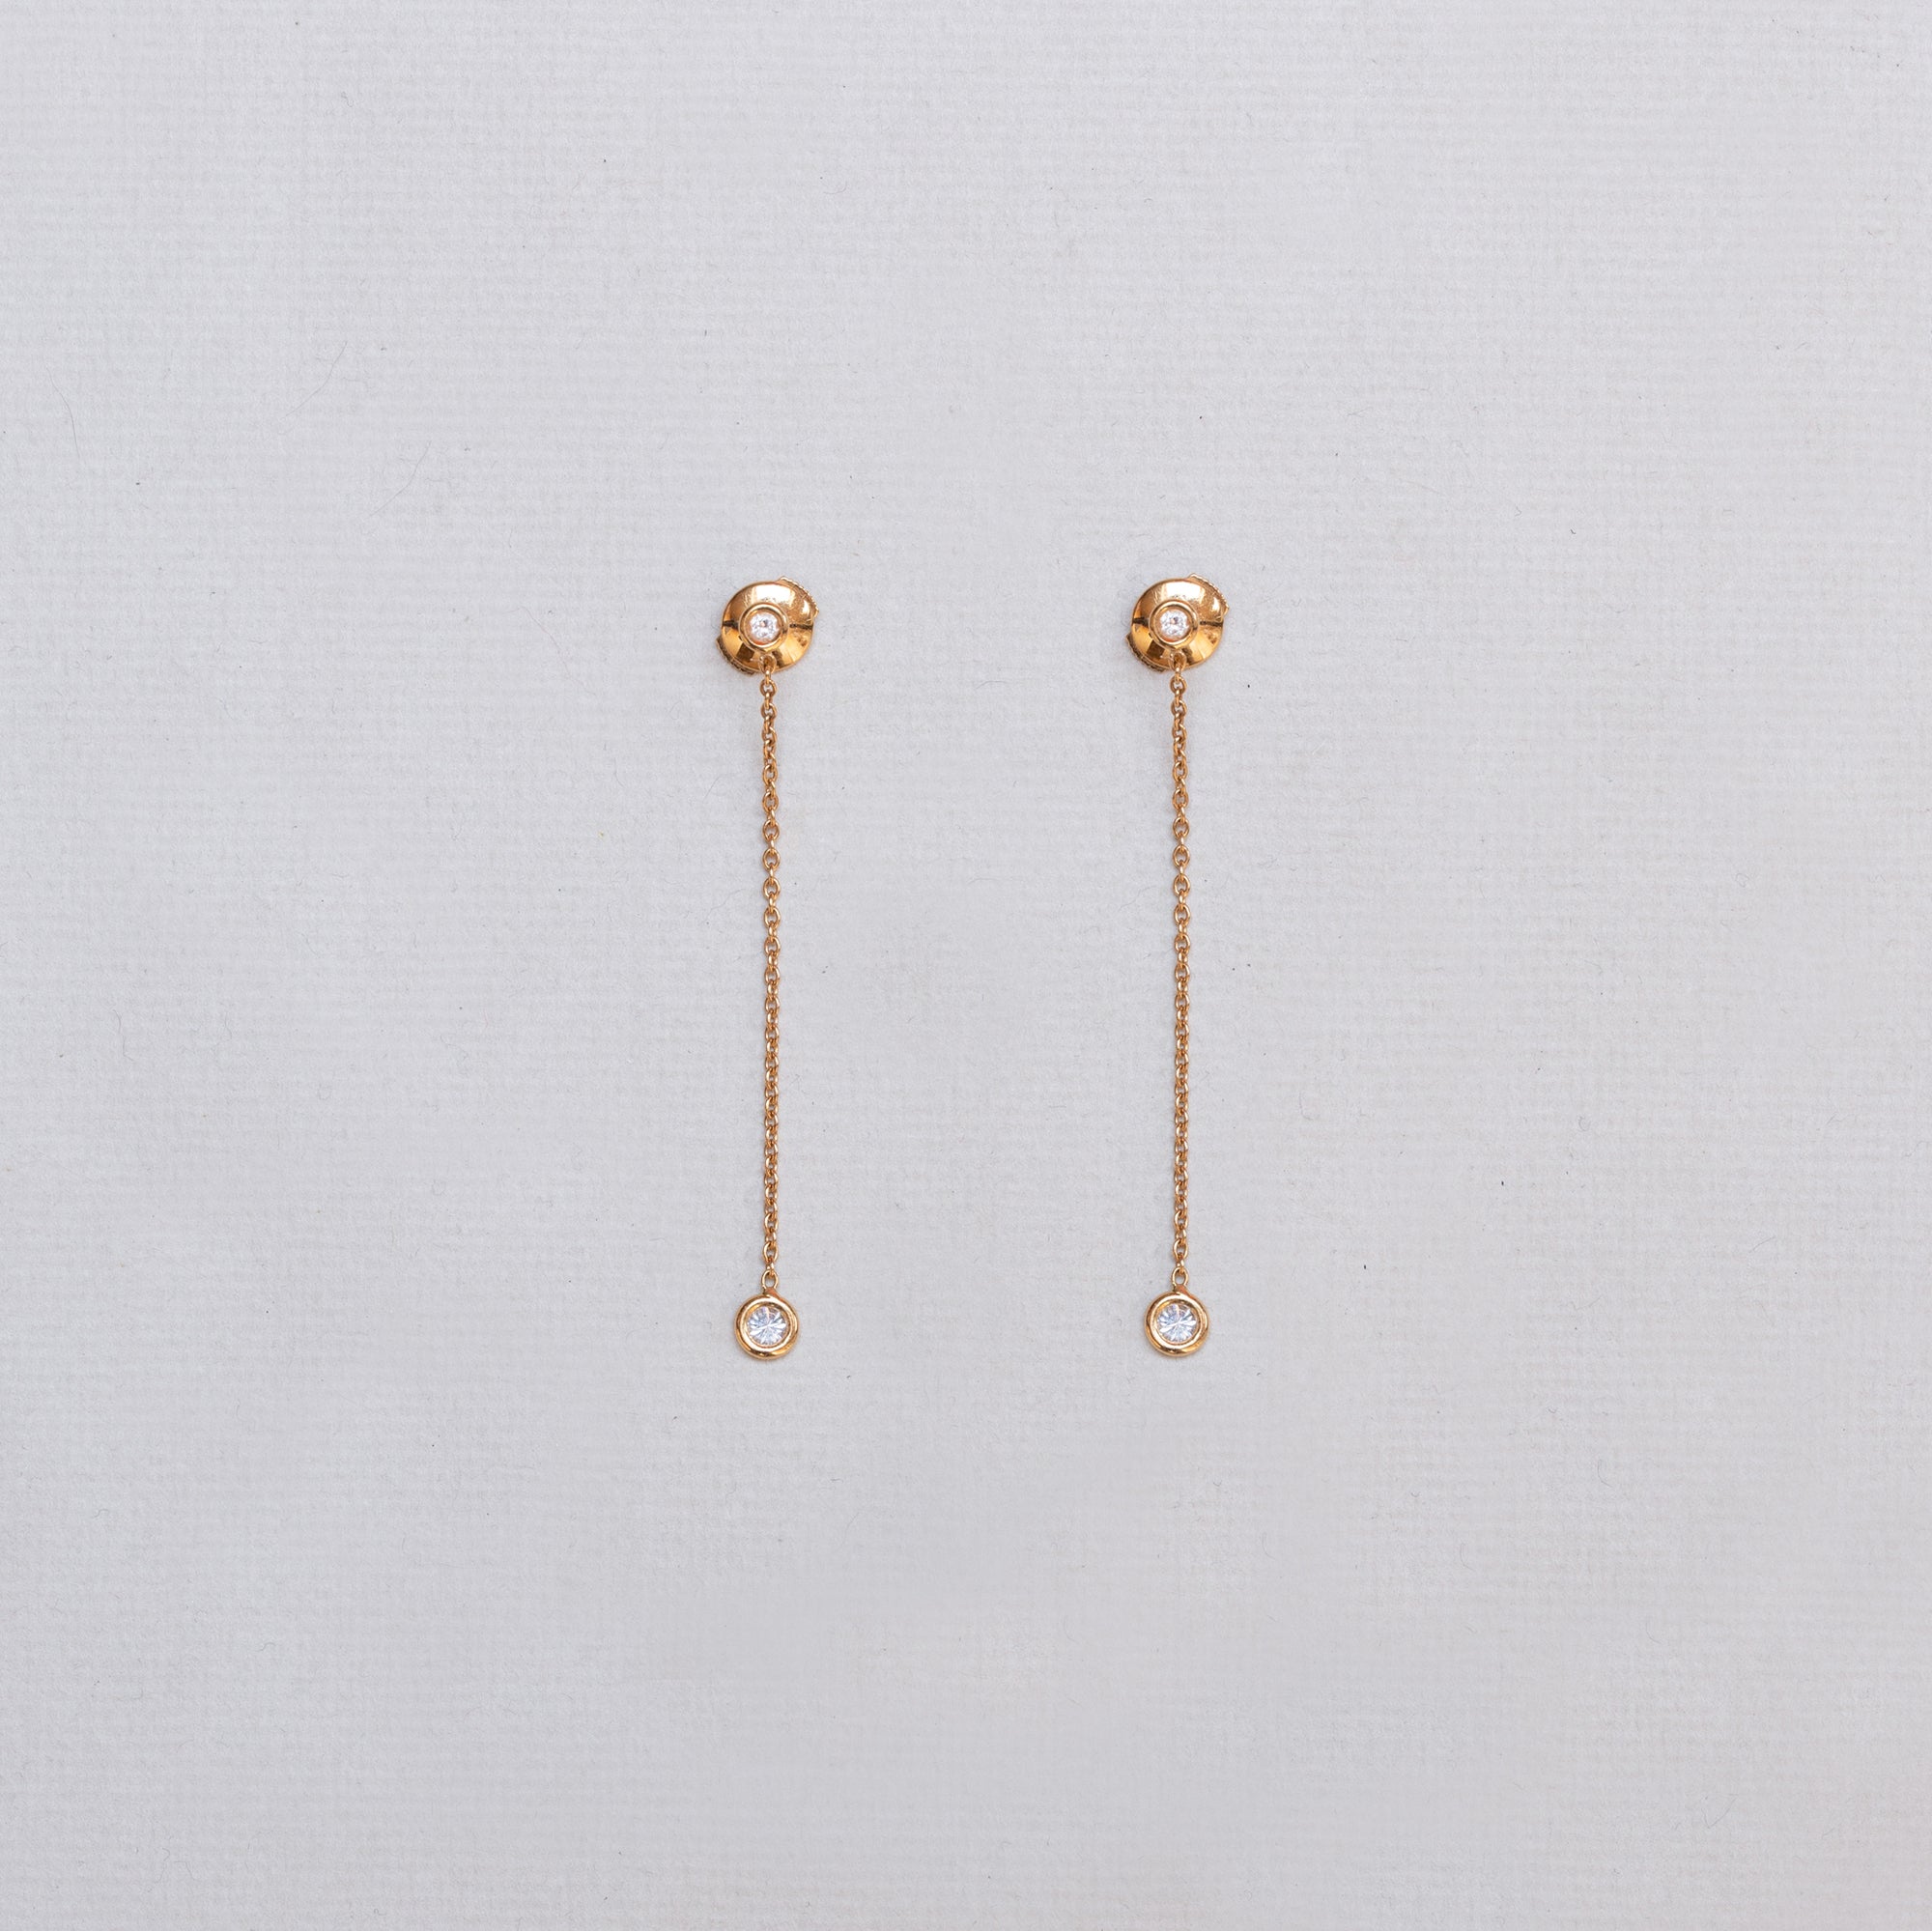 Vintage Dior 18ct Gold Drop Earrings with Diamonds